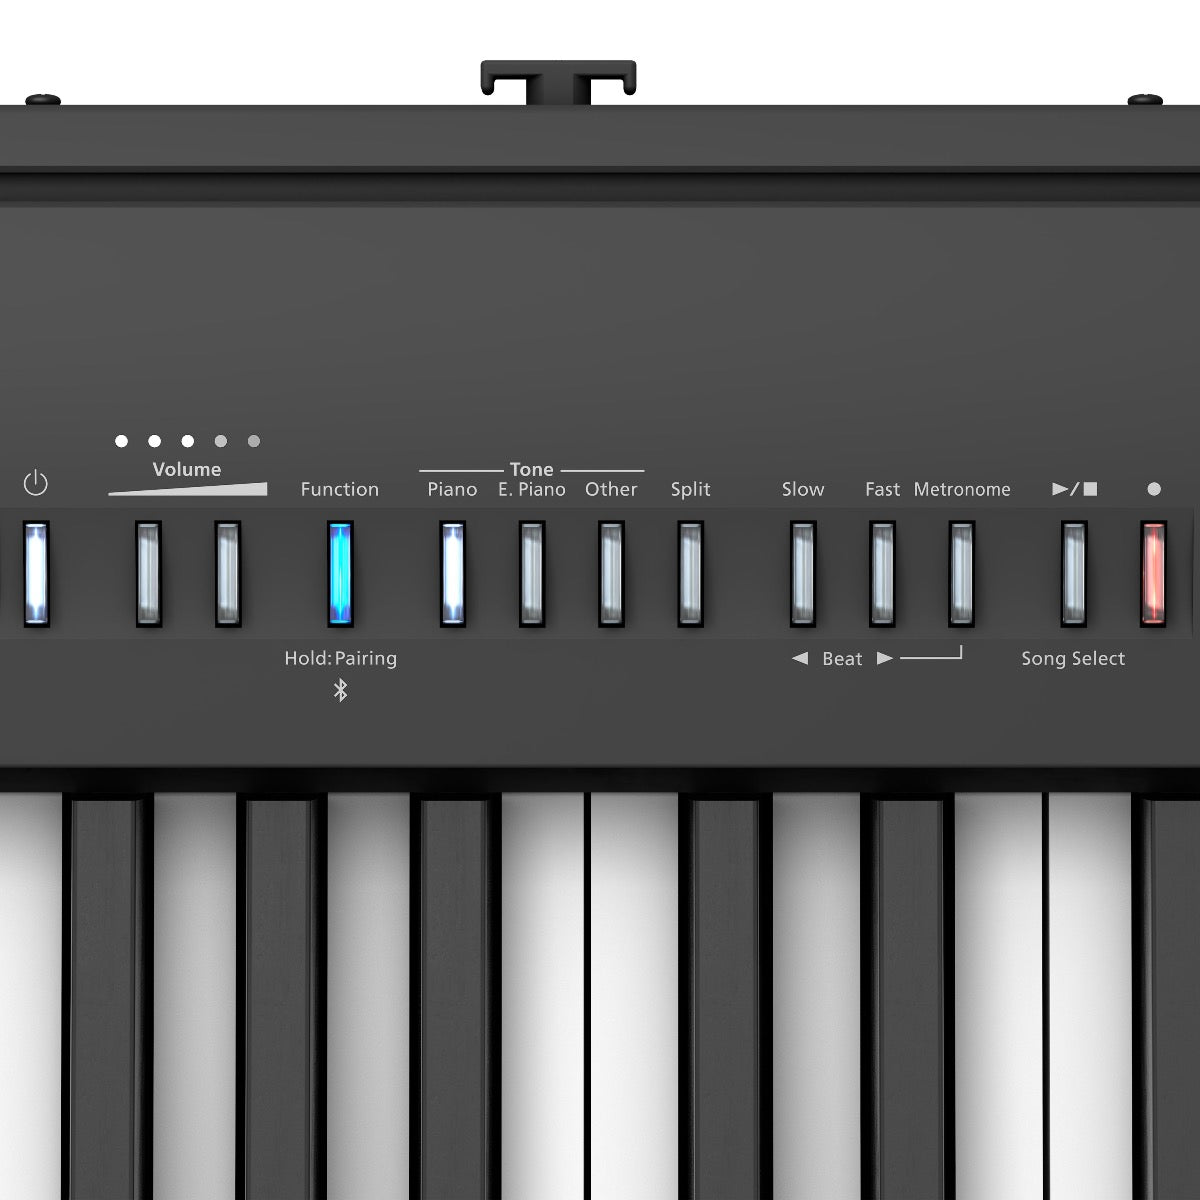 Close-up top view of Roland FP-30X Digital Piano - Black showing control panel